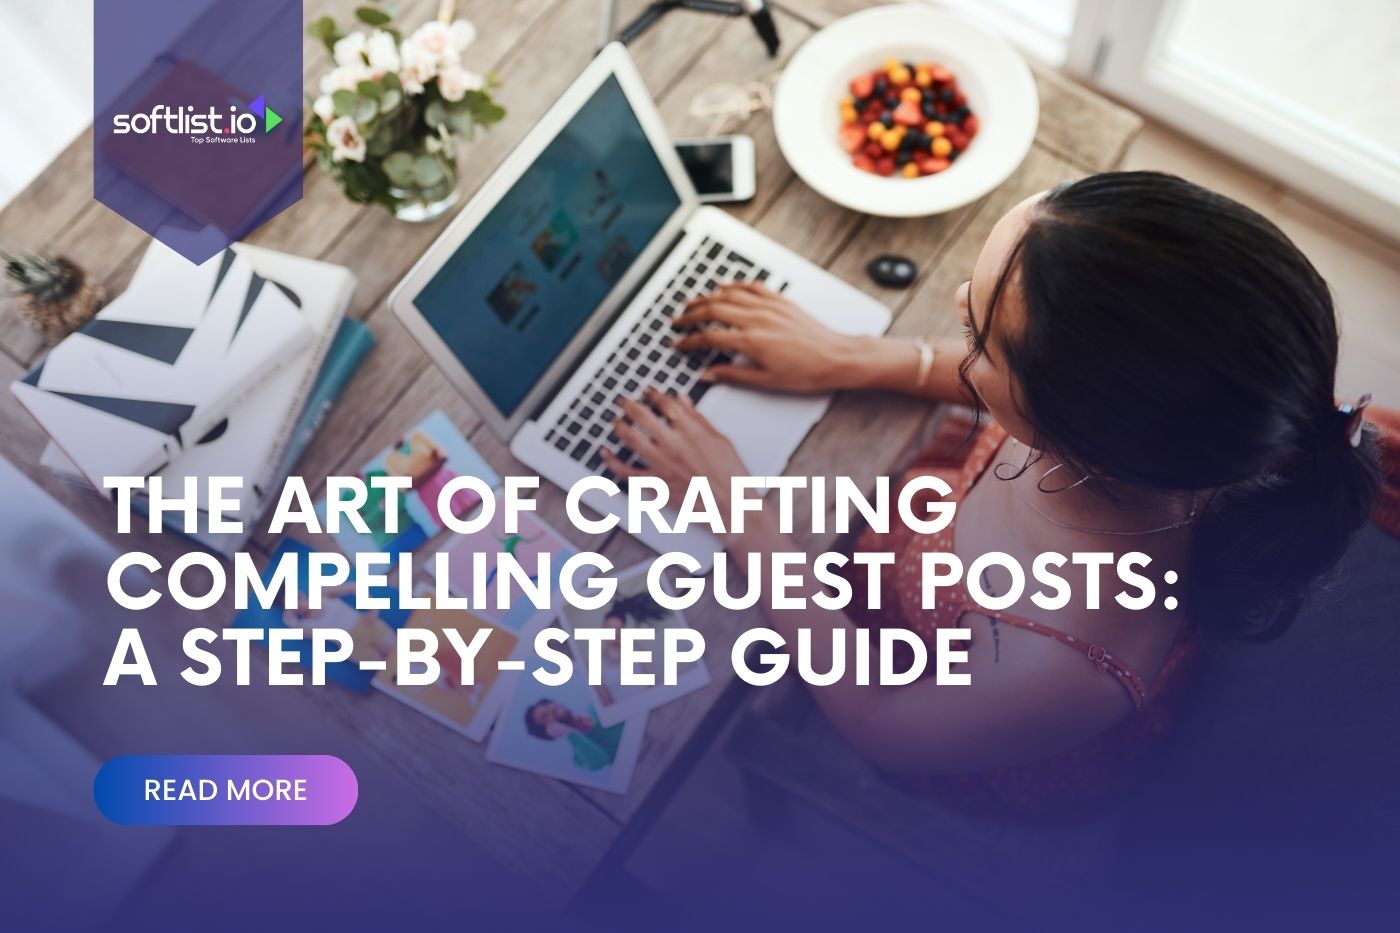 The Art of Crafting Compelling Guest Posts A Step-by-Step Guide